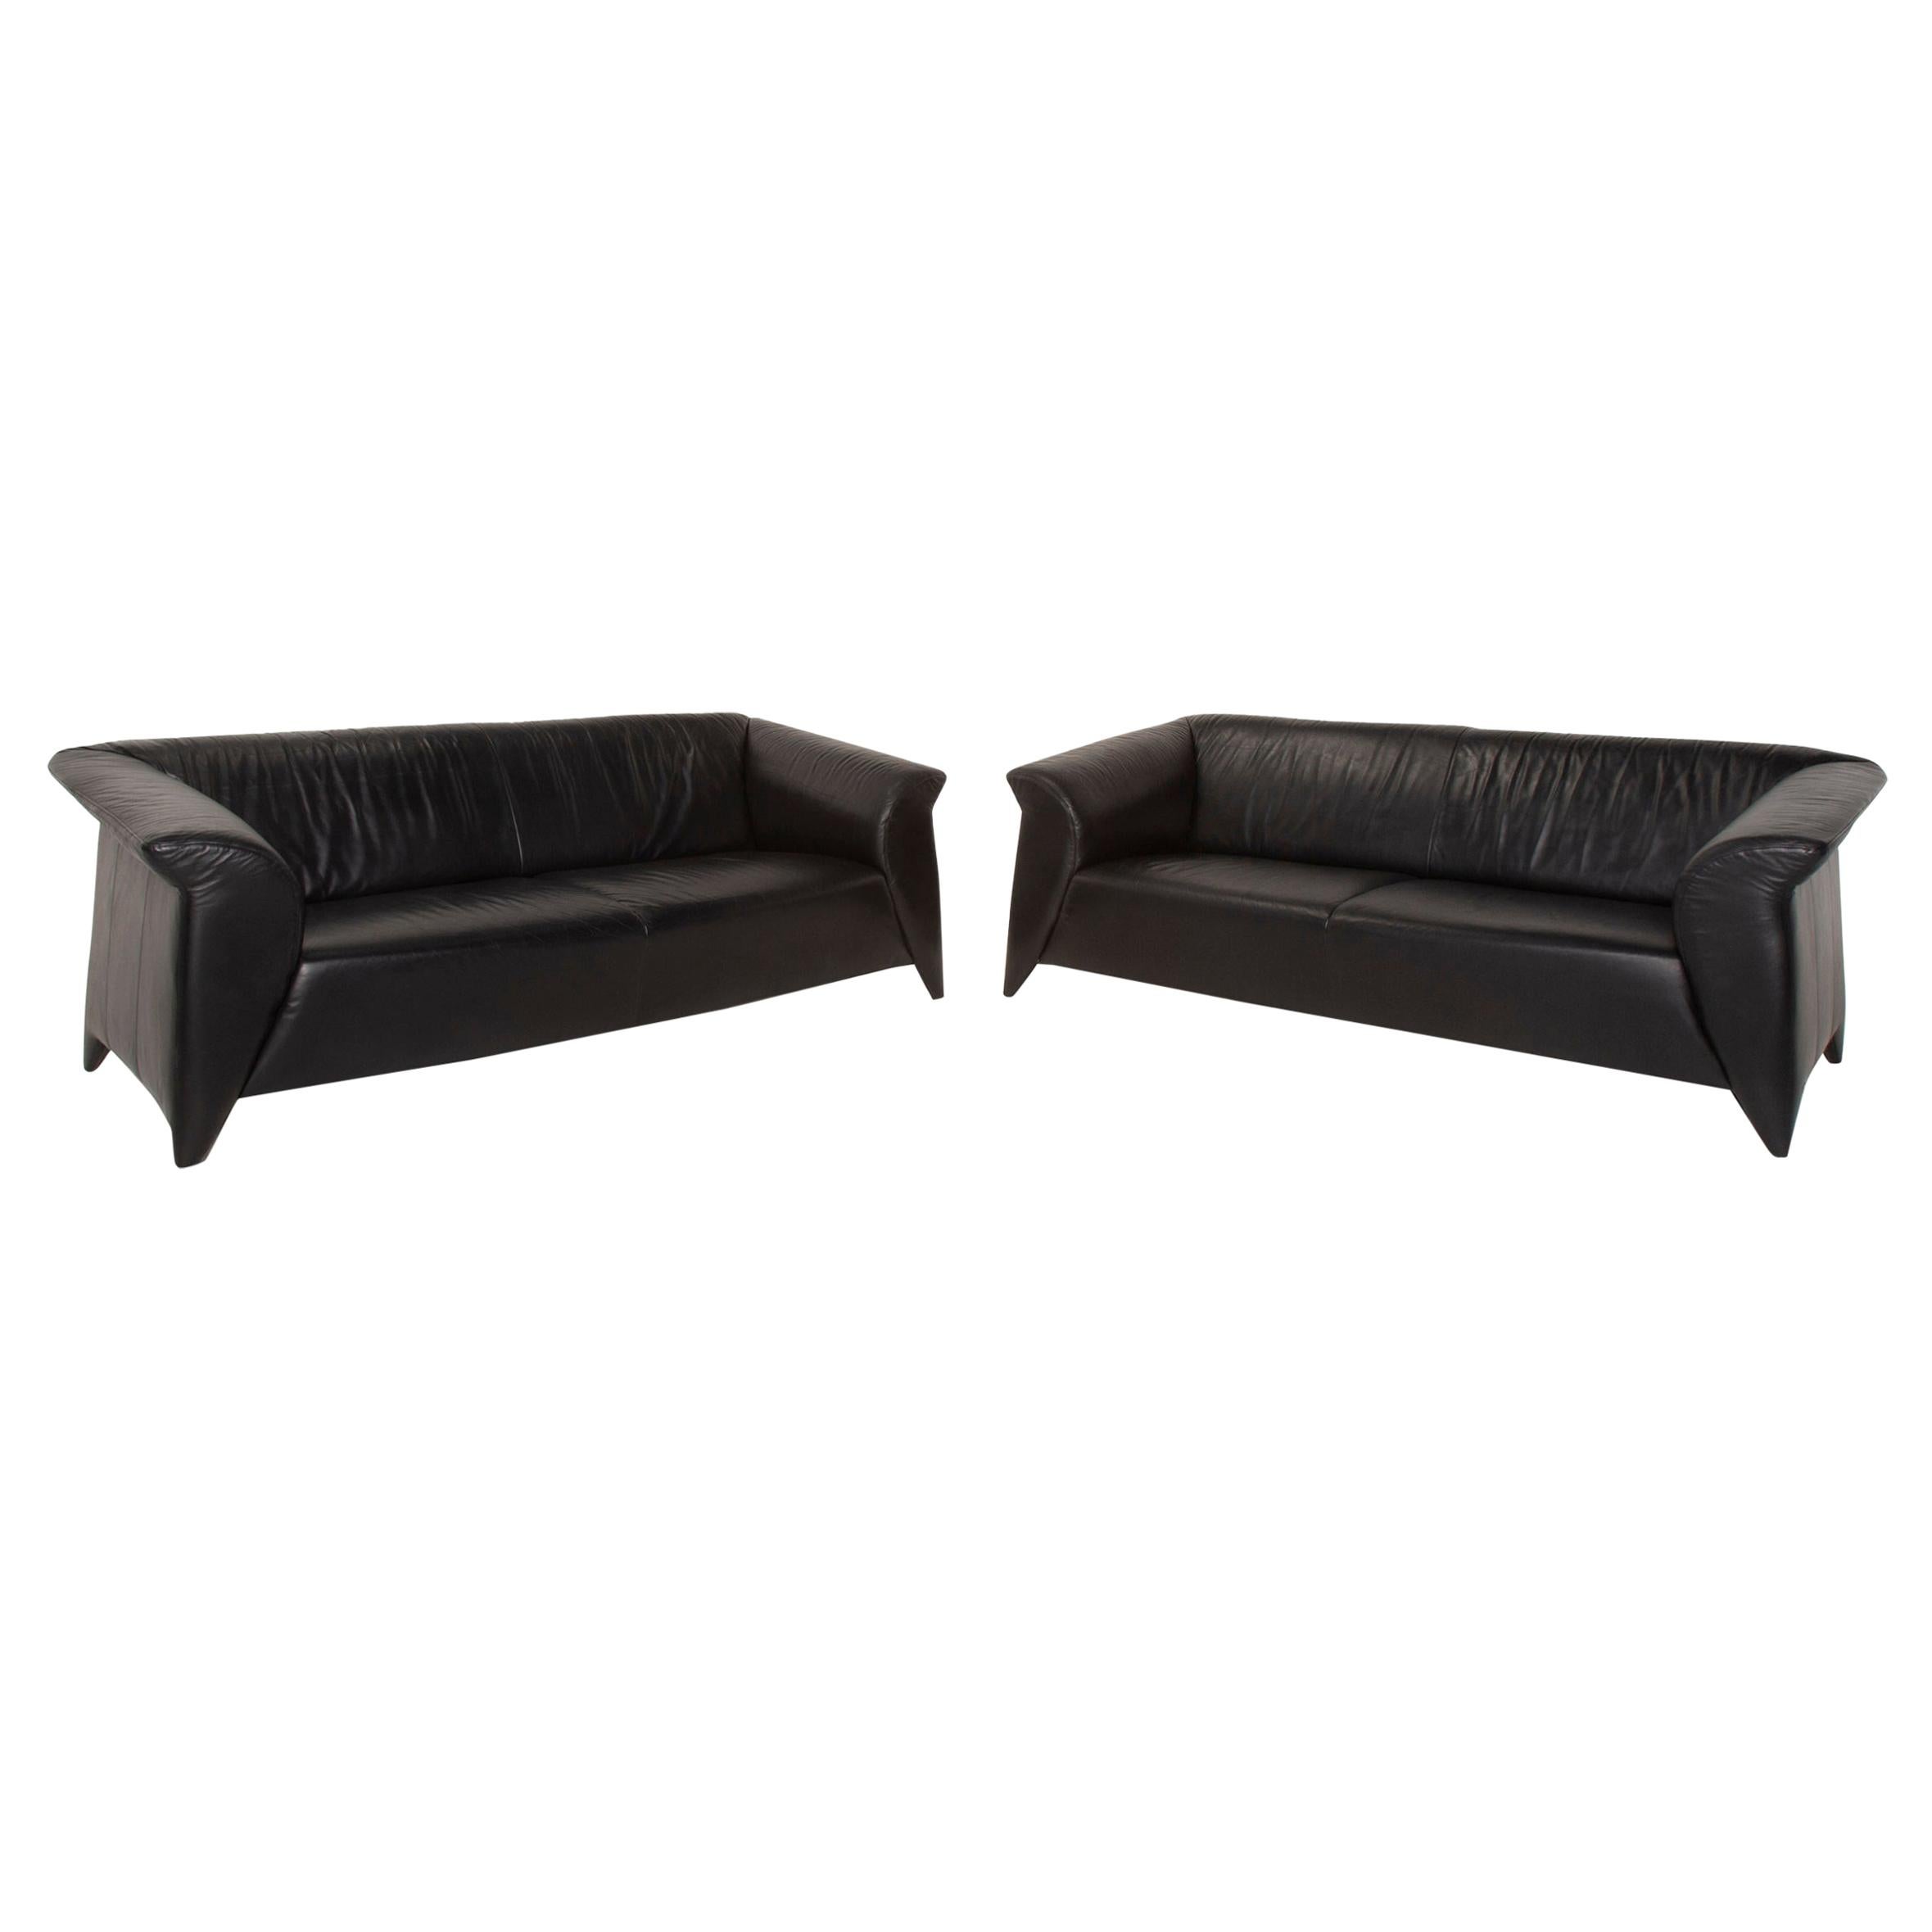 Laauser Leather Sofa Set Black 2x Two, Black Leather Couch Sofa Bed Egypt